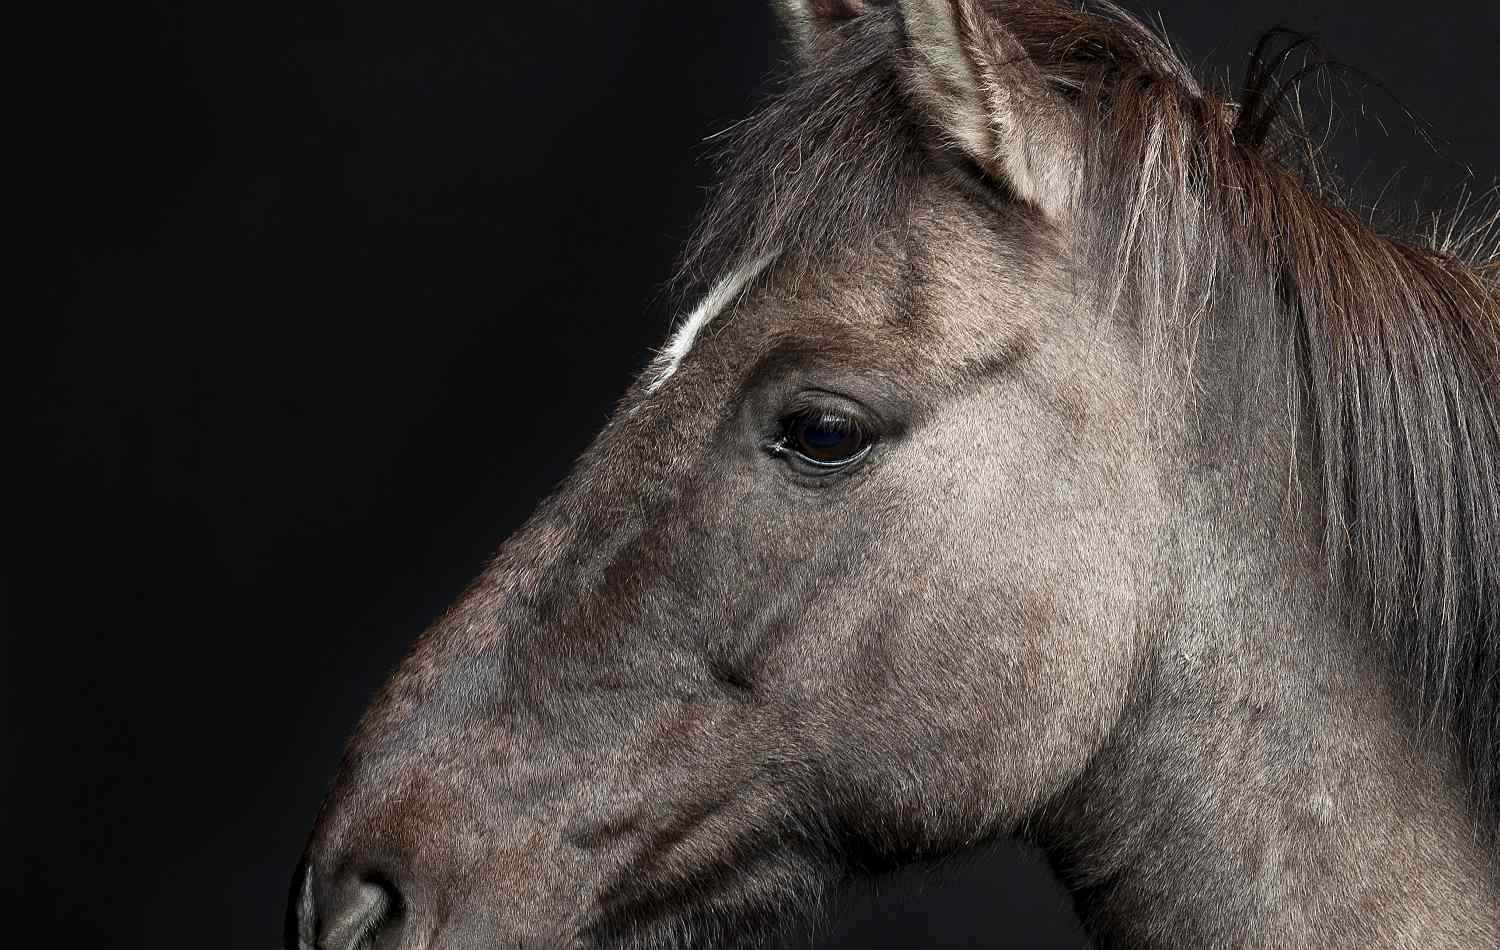 The cheek of a horse.